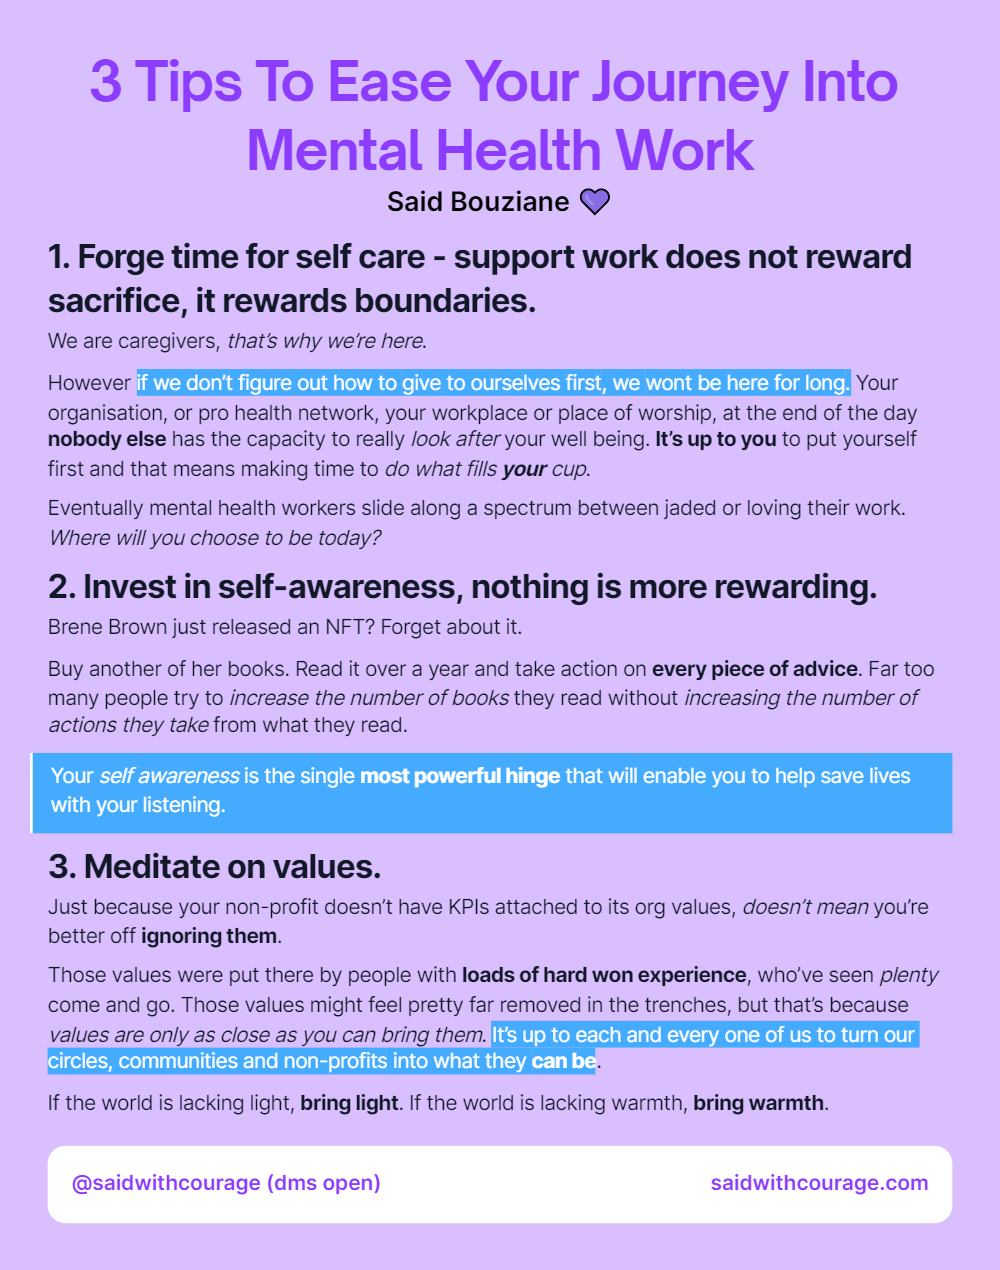 3 Tips To Ease Your Journey Into Mental Health Work